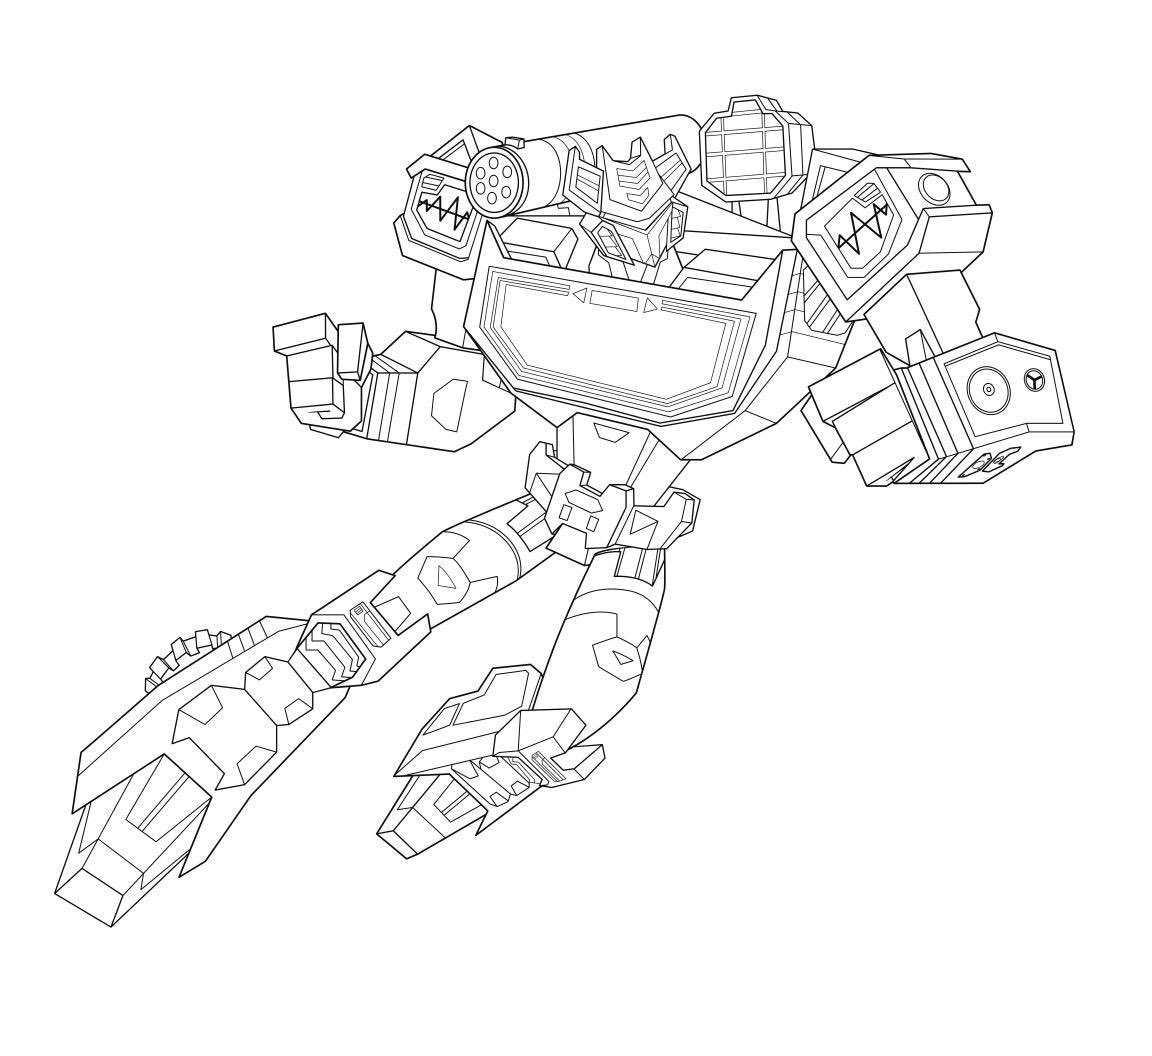 Official Takara Tomy Transformers Cyberverse Coloring Pages - Transformers  News - TFW2005